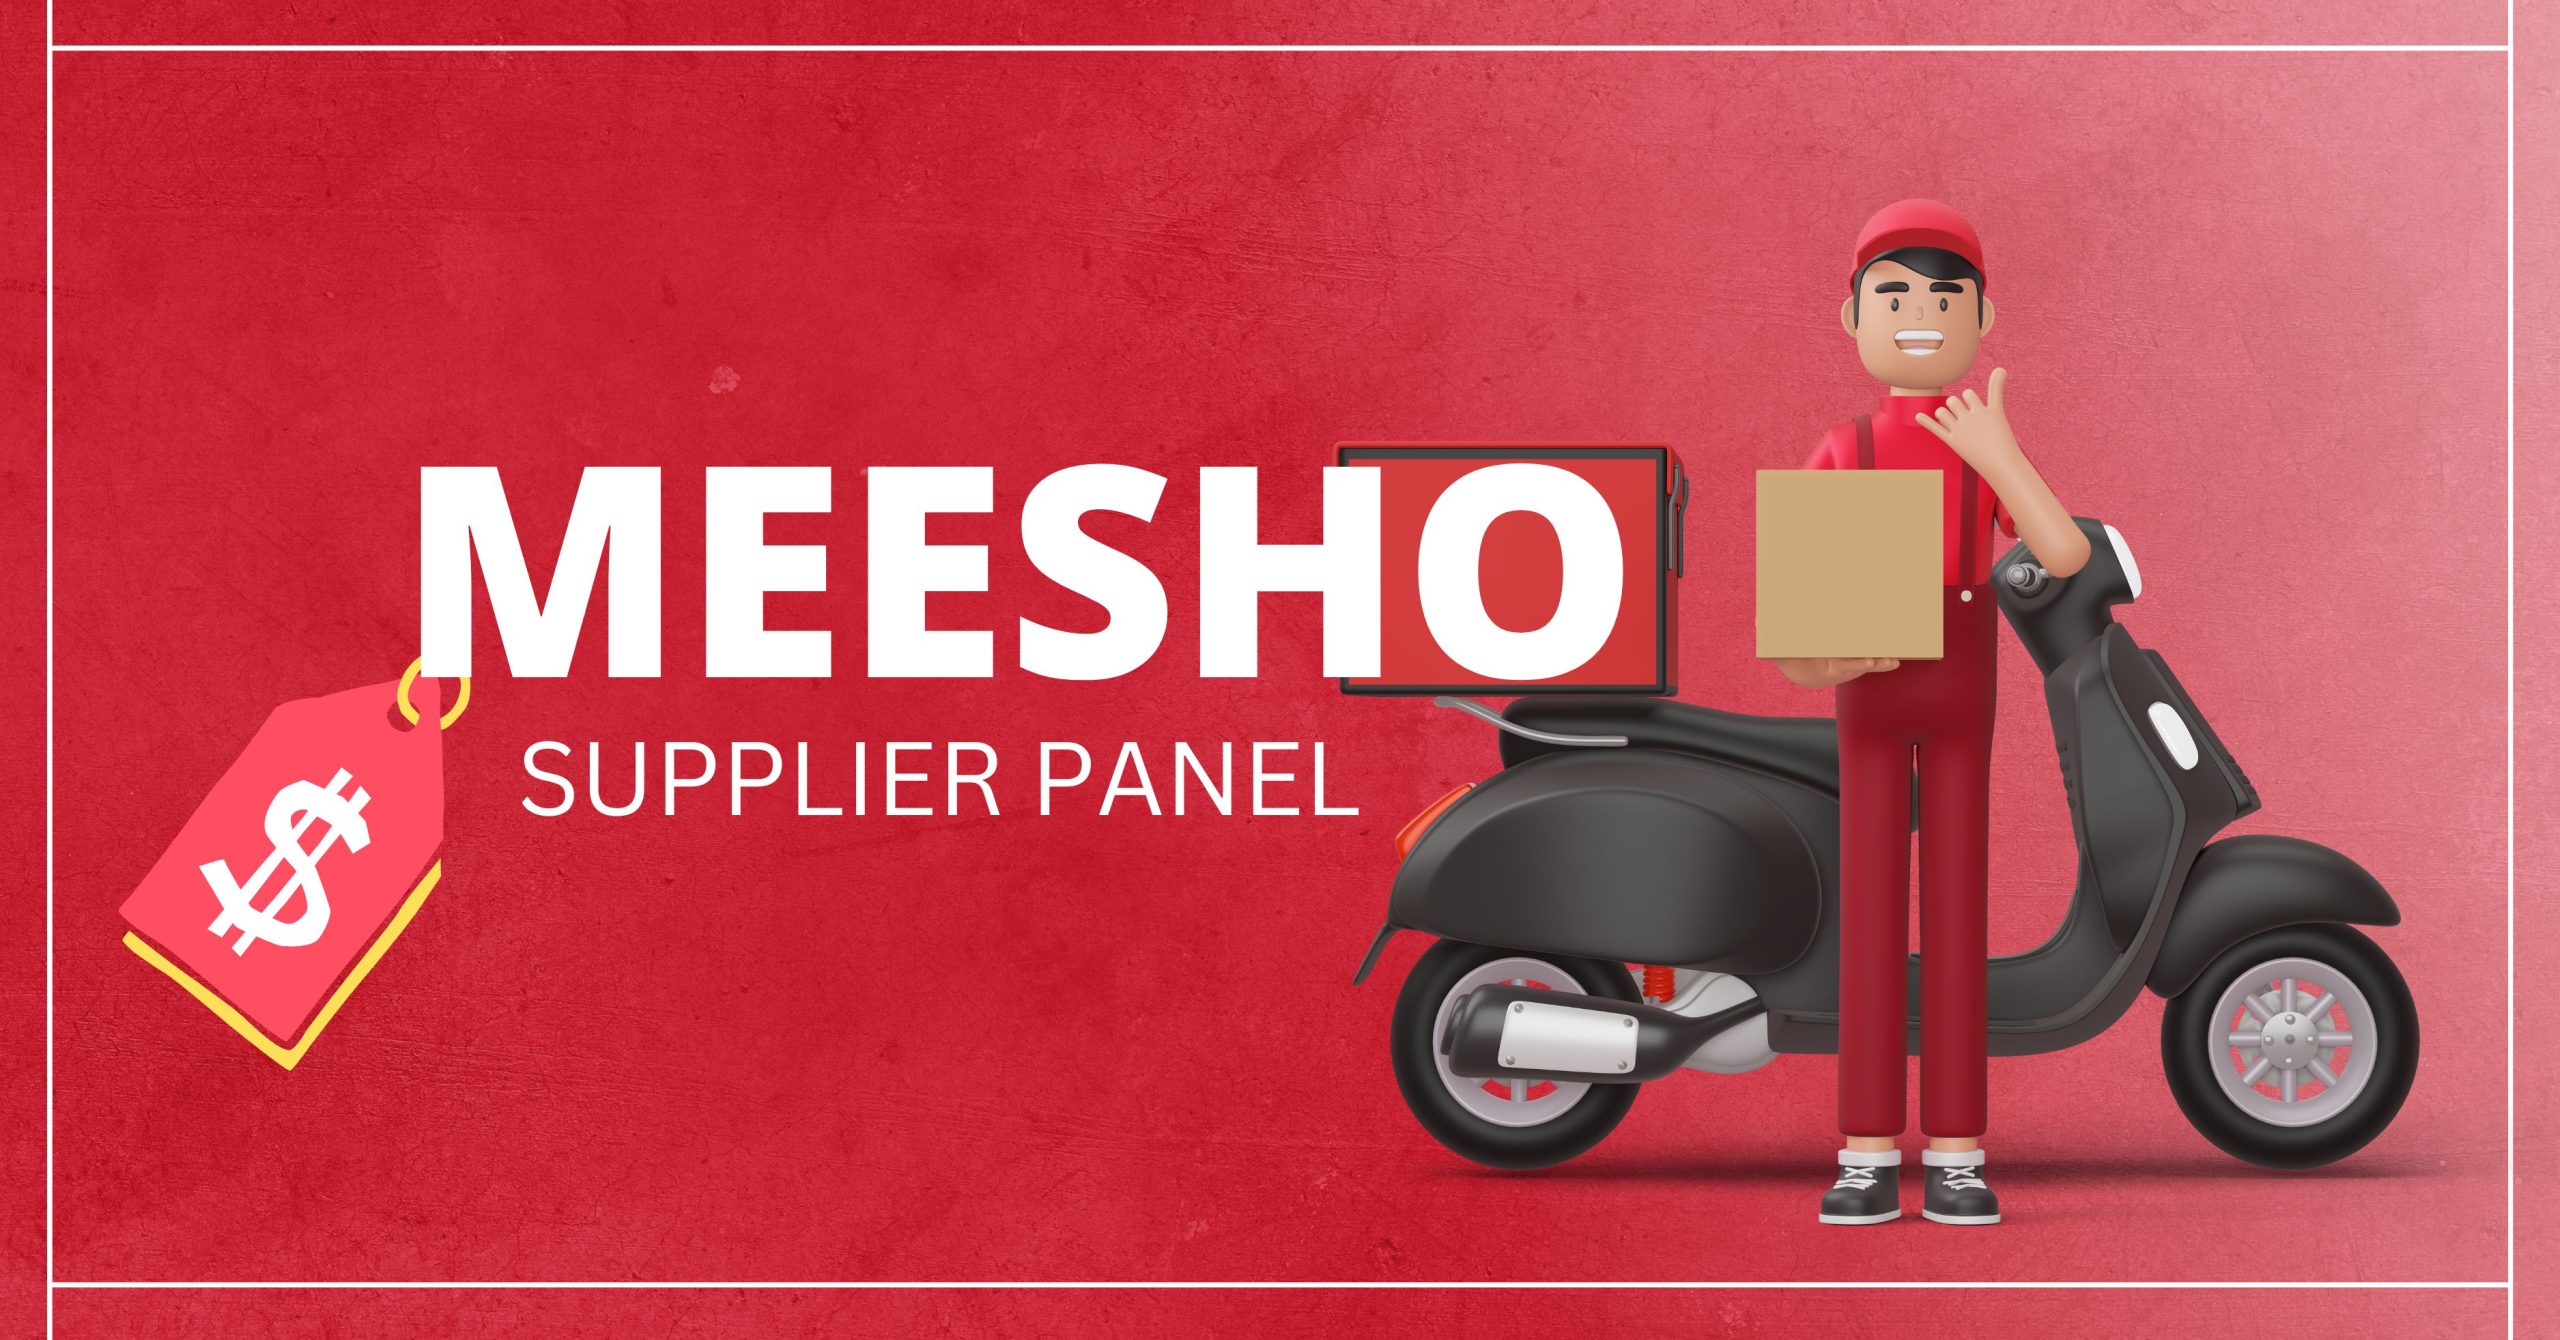 Meesho Supplier Panel: is an online marketplace that offers business opportunities and client services.